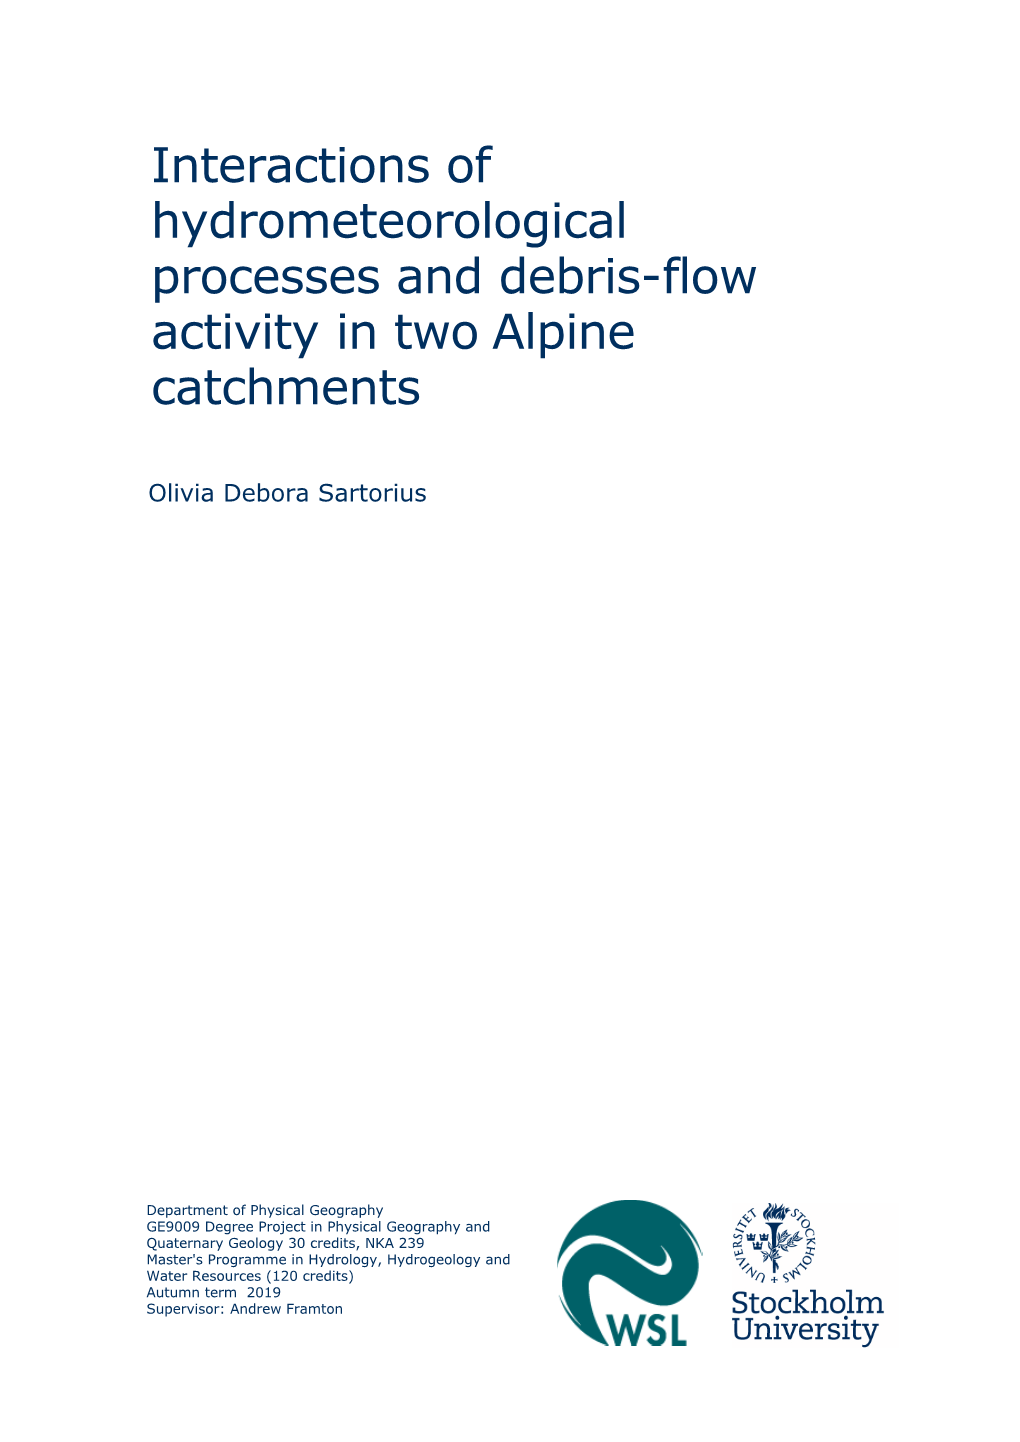 Interactions of Hydrometeorological Processes and Debris-Flow Activity in Two Alpine Catchments